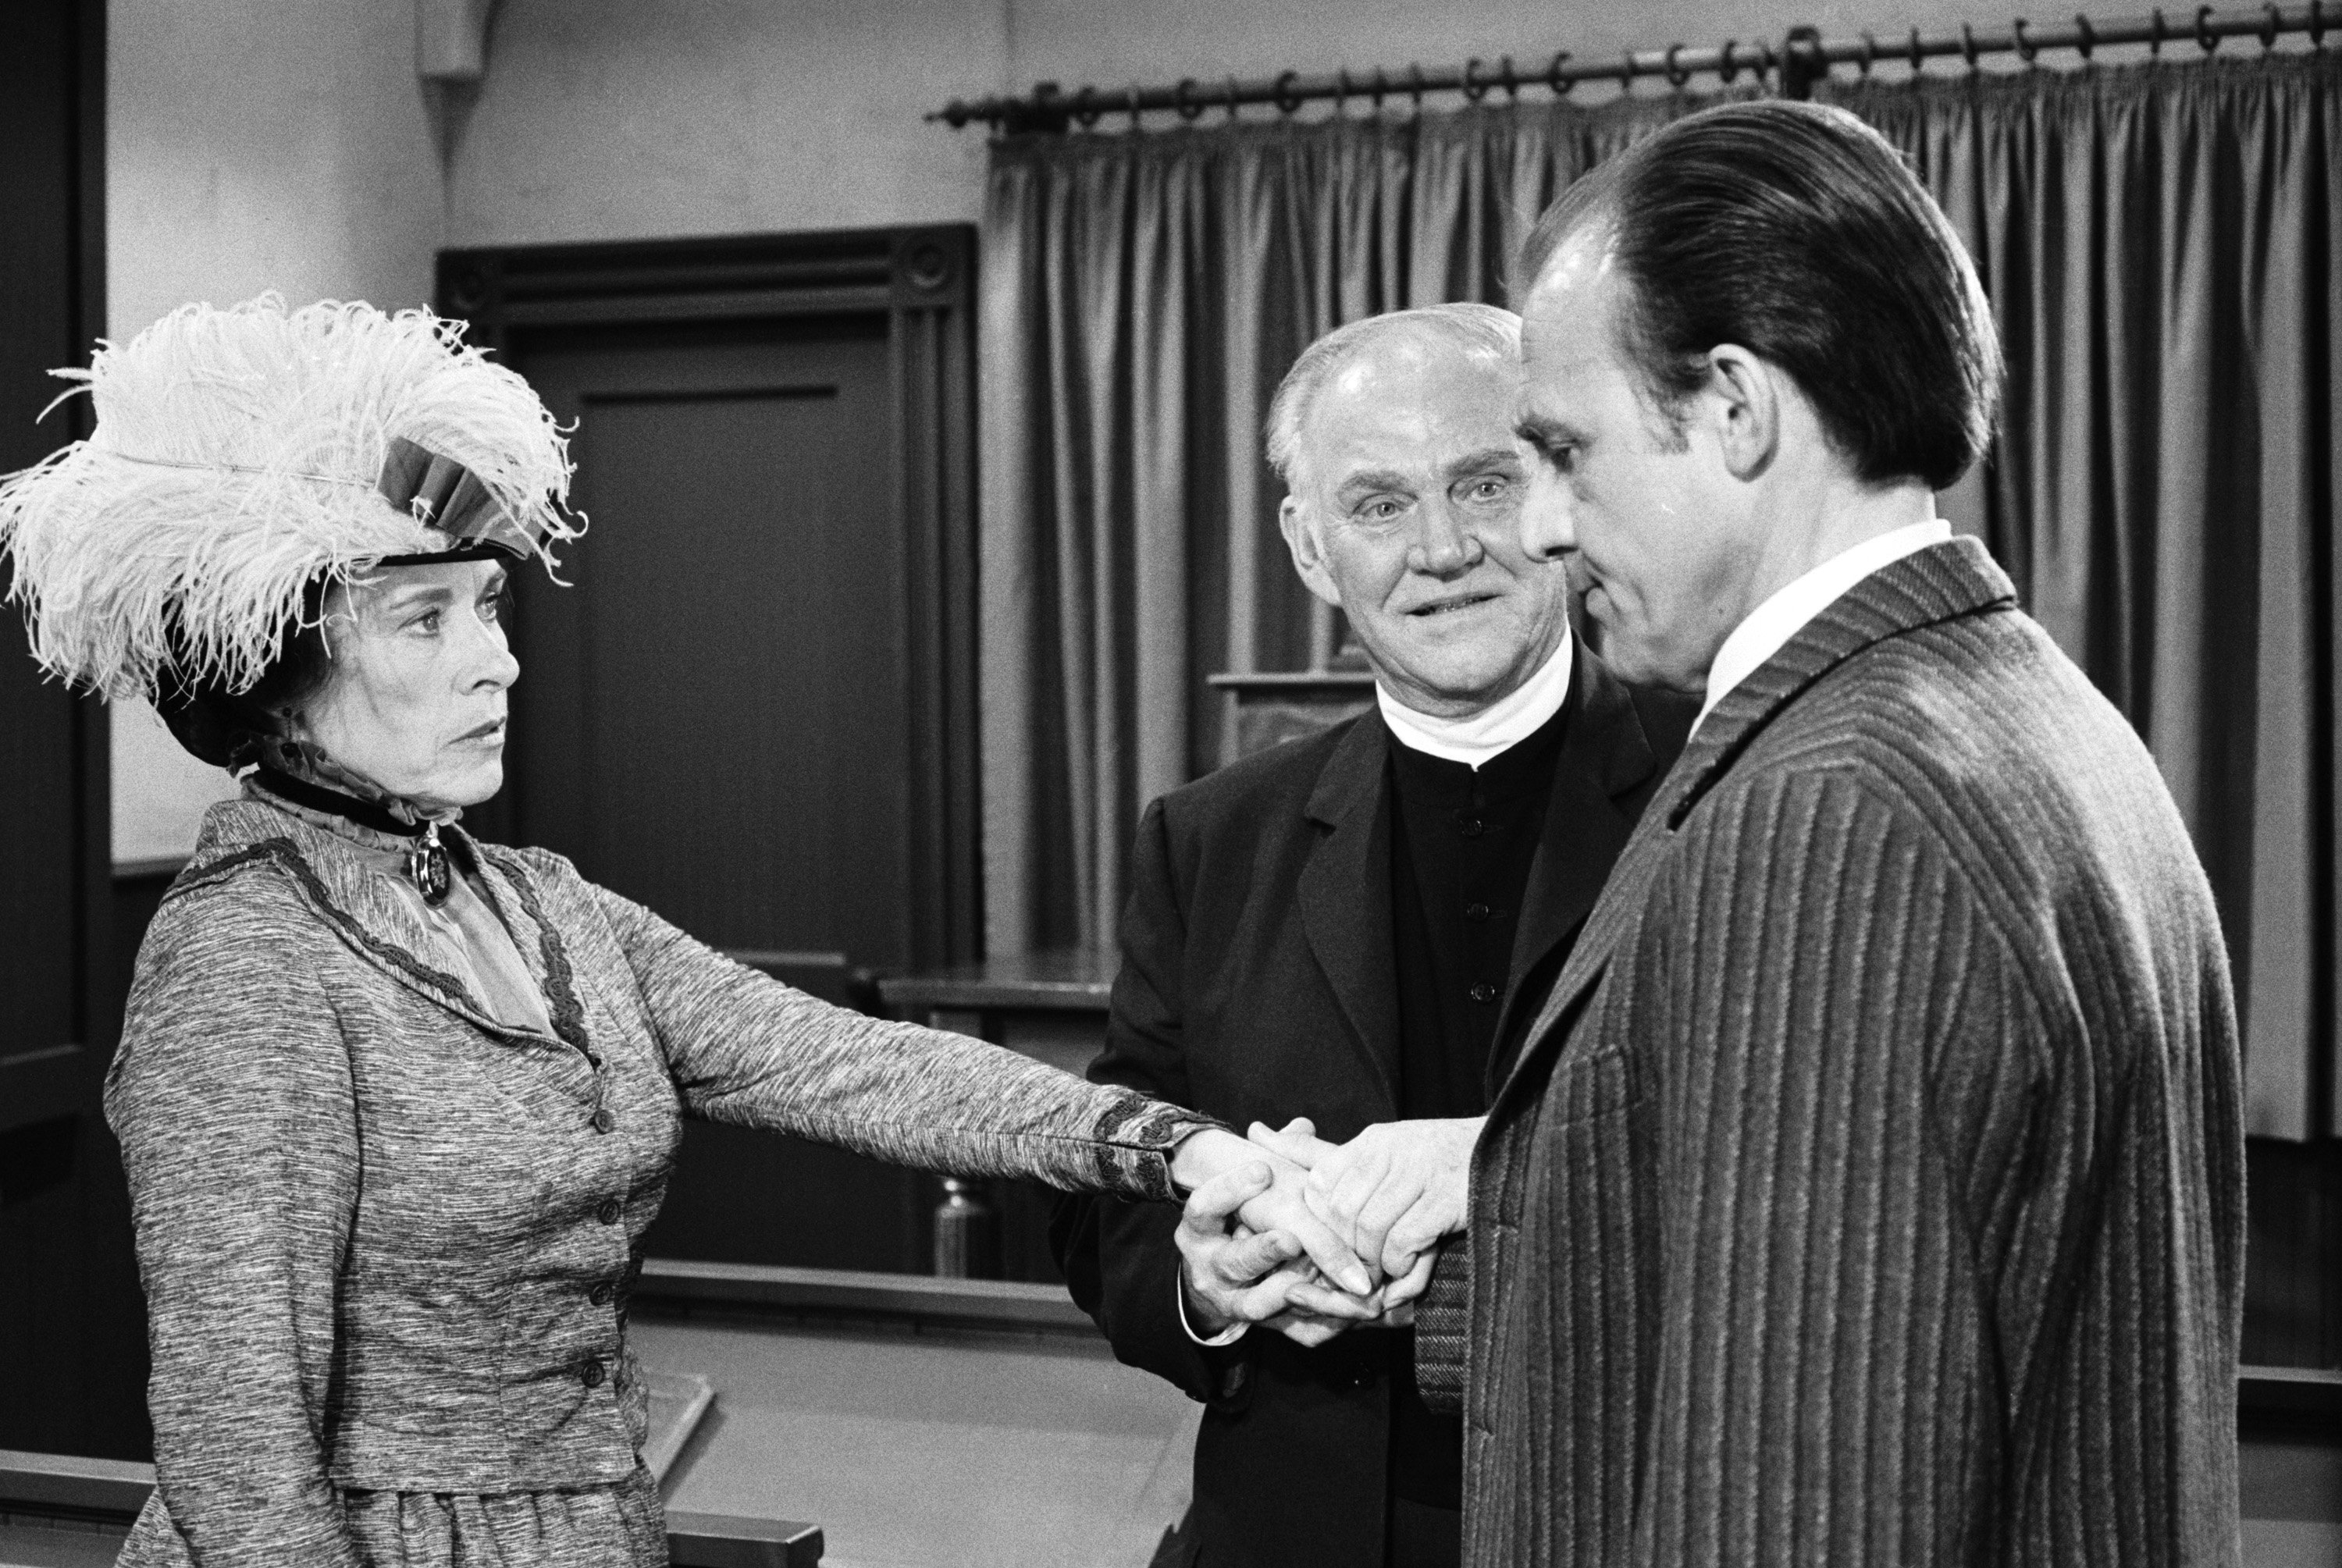 (L to R): Katherine MacGregor as Harriet Oleson, Dabs Greer as Reverend Alden, and Richard Bull as Nels Oleson in a scene from 'Little House on the Prairie,' 1975